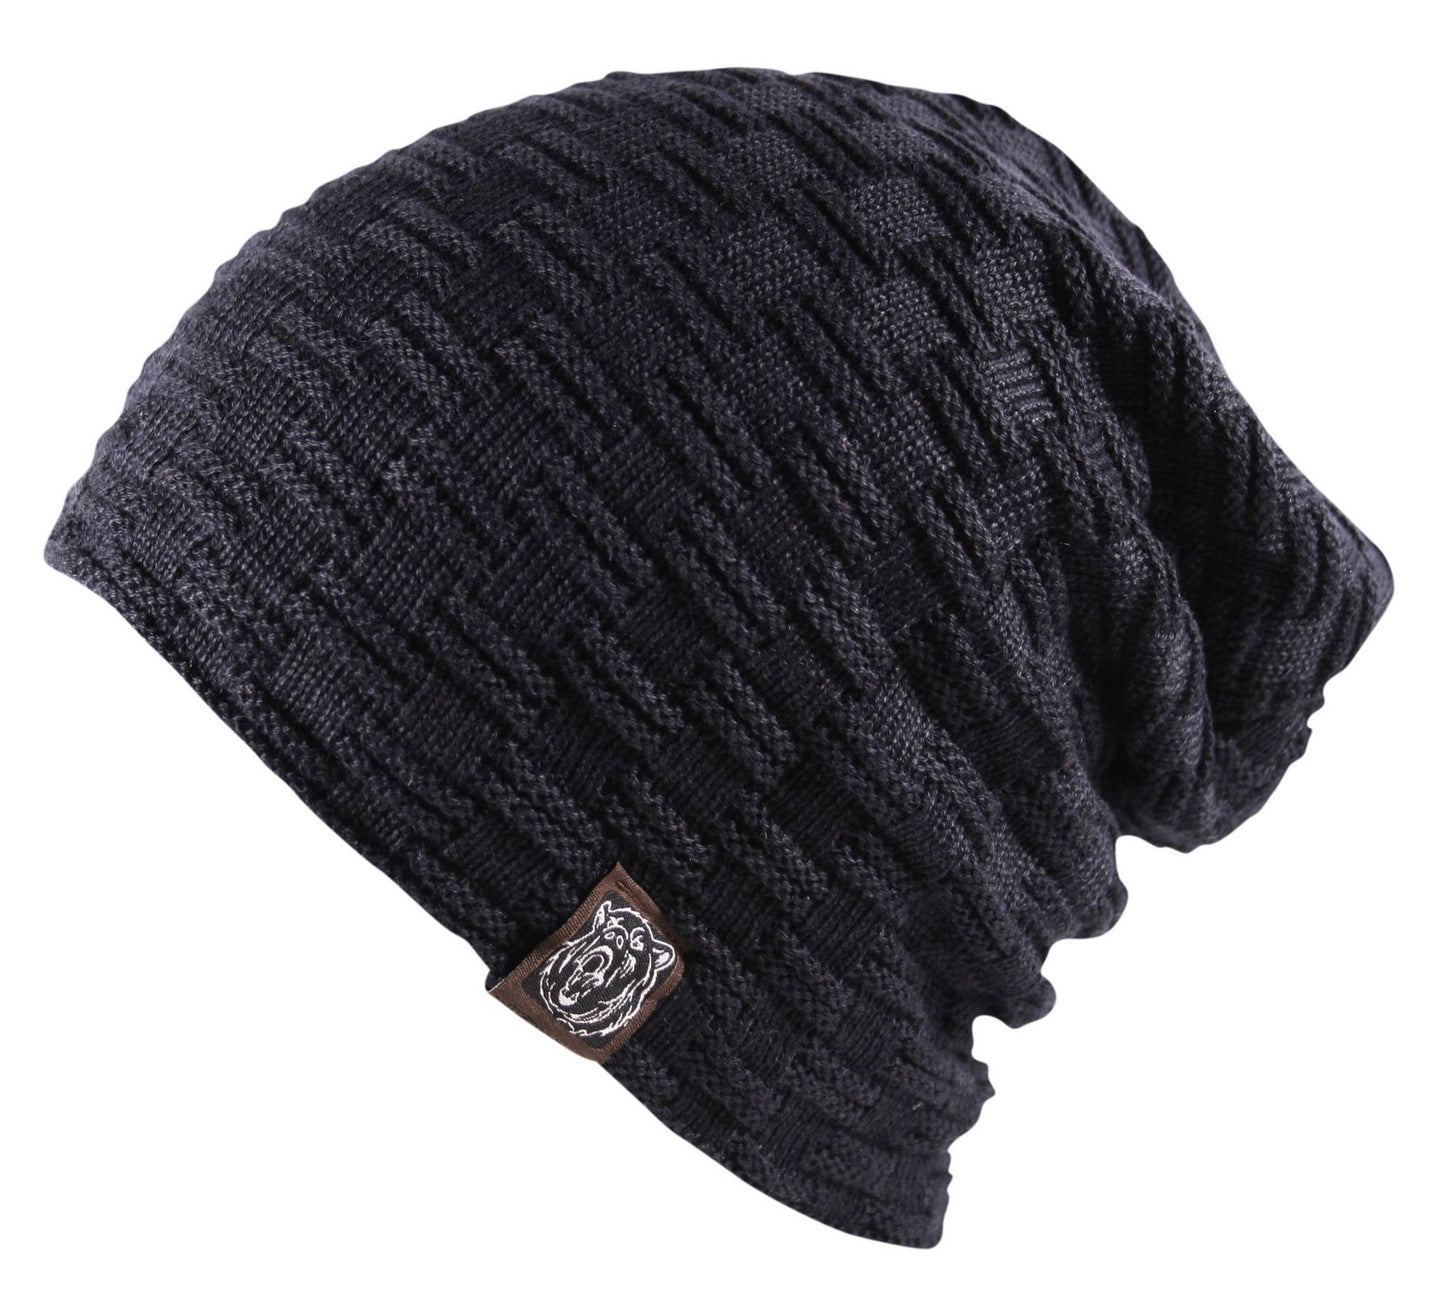 Unisex Slouch Waffle Thick Knit Beanie Hat in Navy Blue